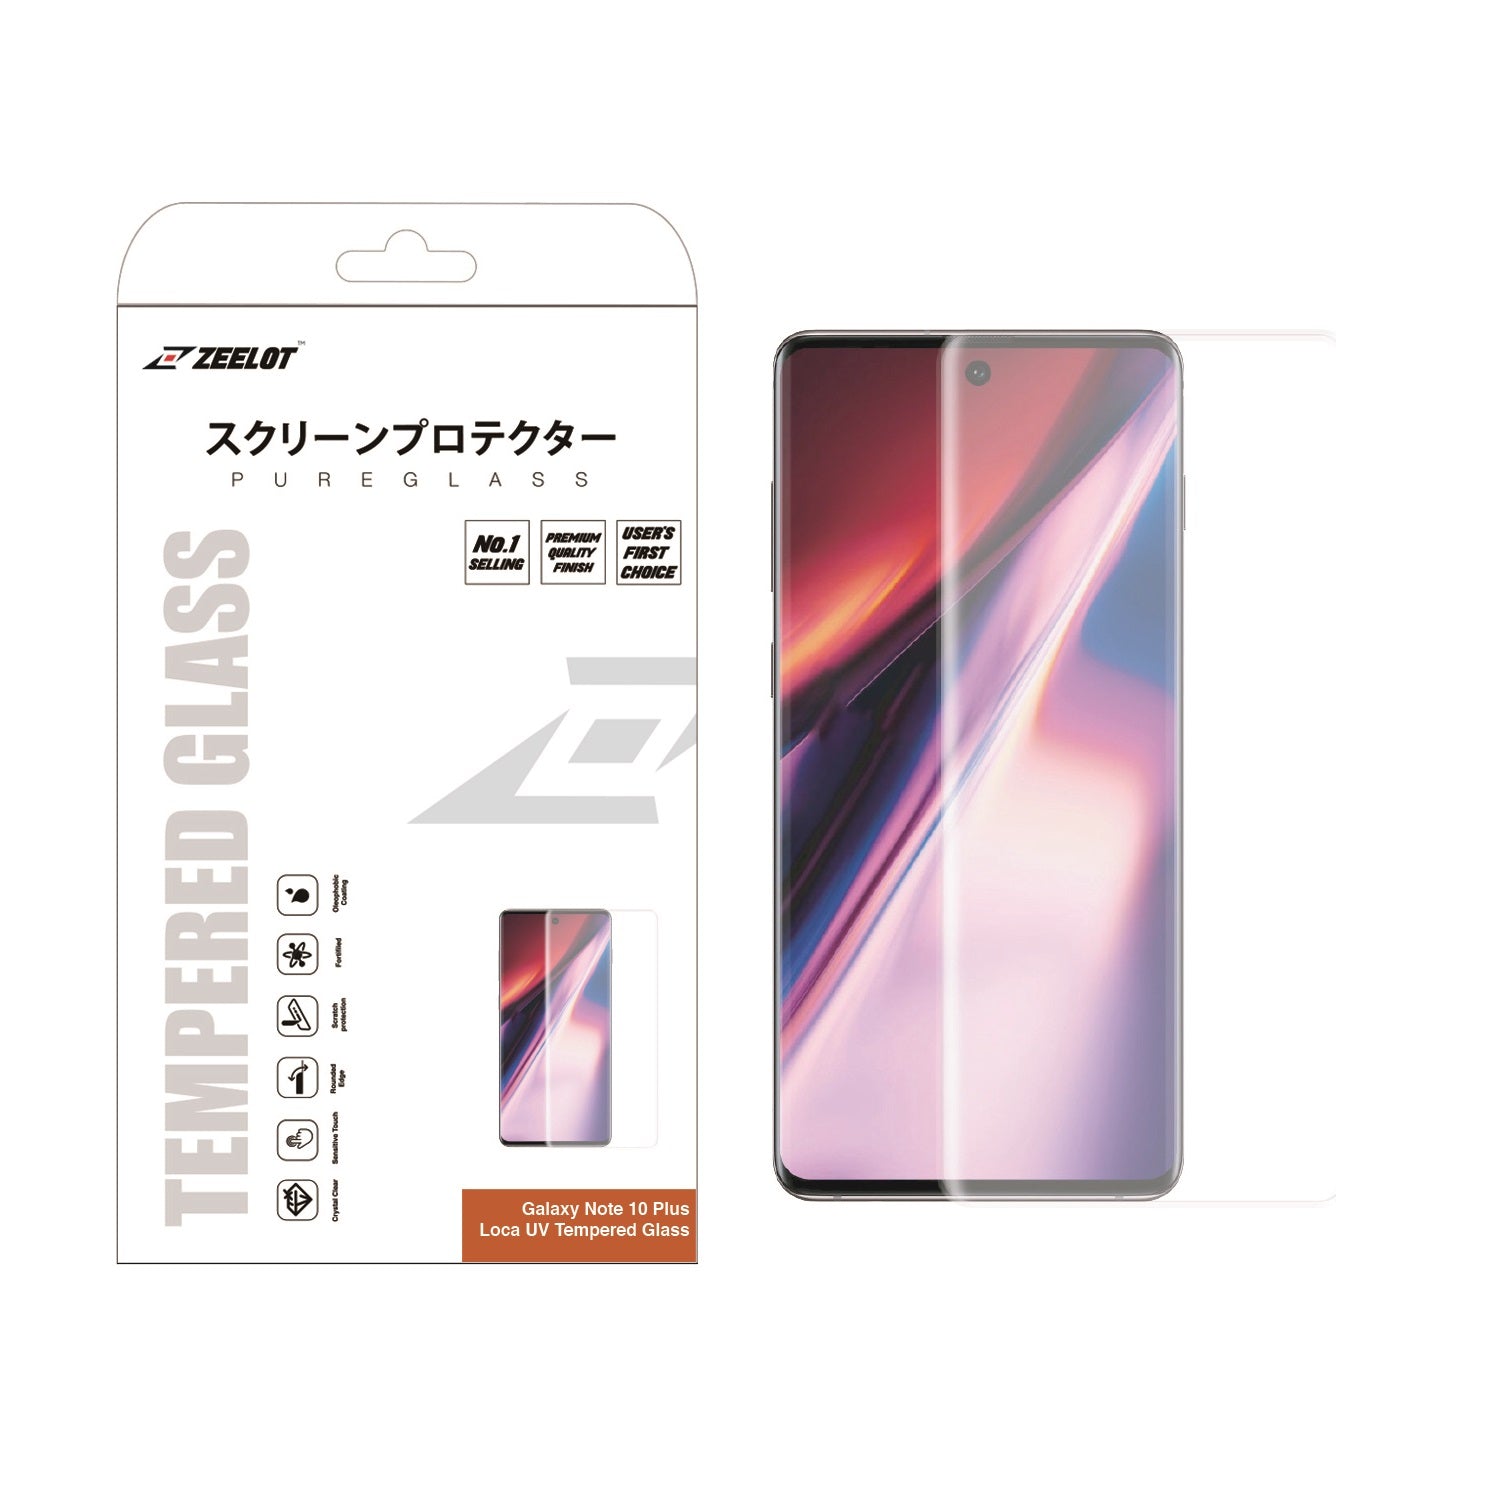 Where to buy the best-priced Samsung Note 10 Plus/10+ Tempered Glass in Singapore? Check out the Zeelot PureGlass LOCA Matte series cover here! More discount accessories only at Casefactorie!